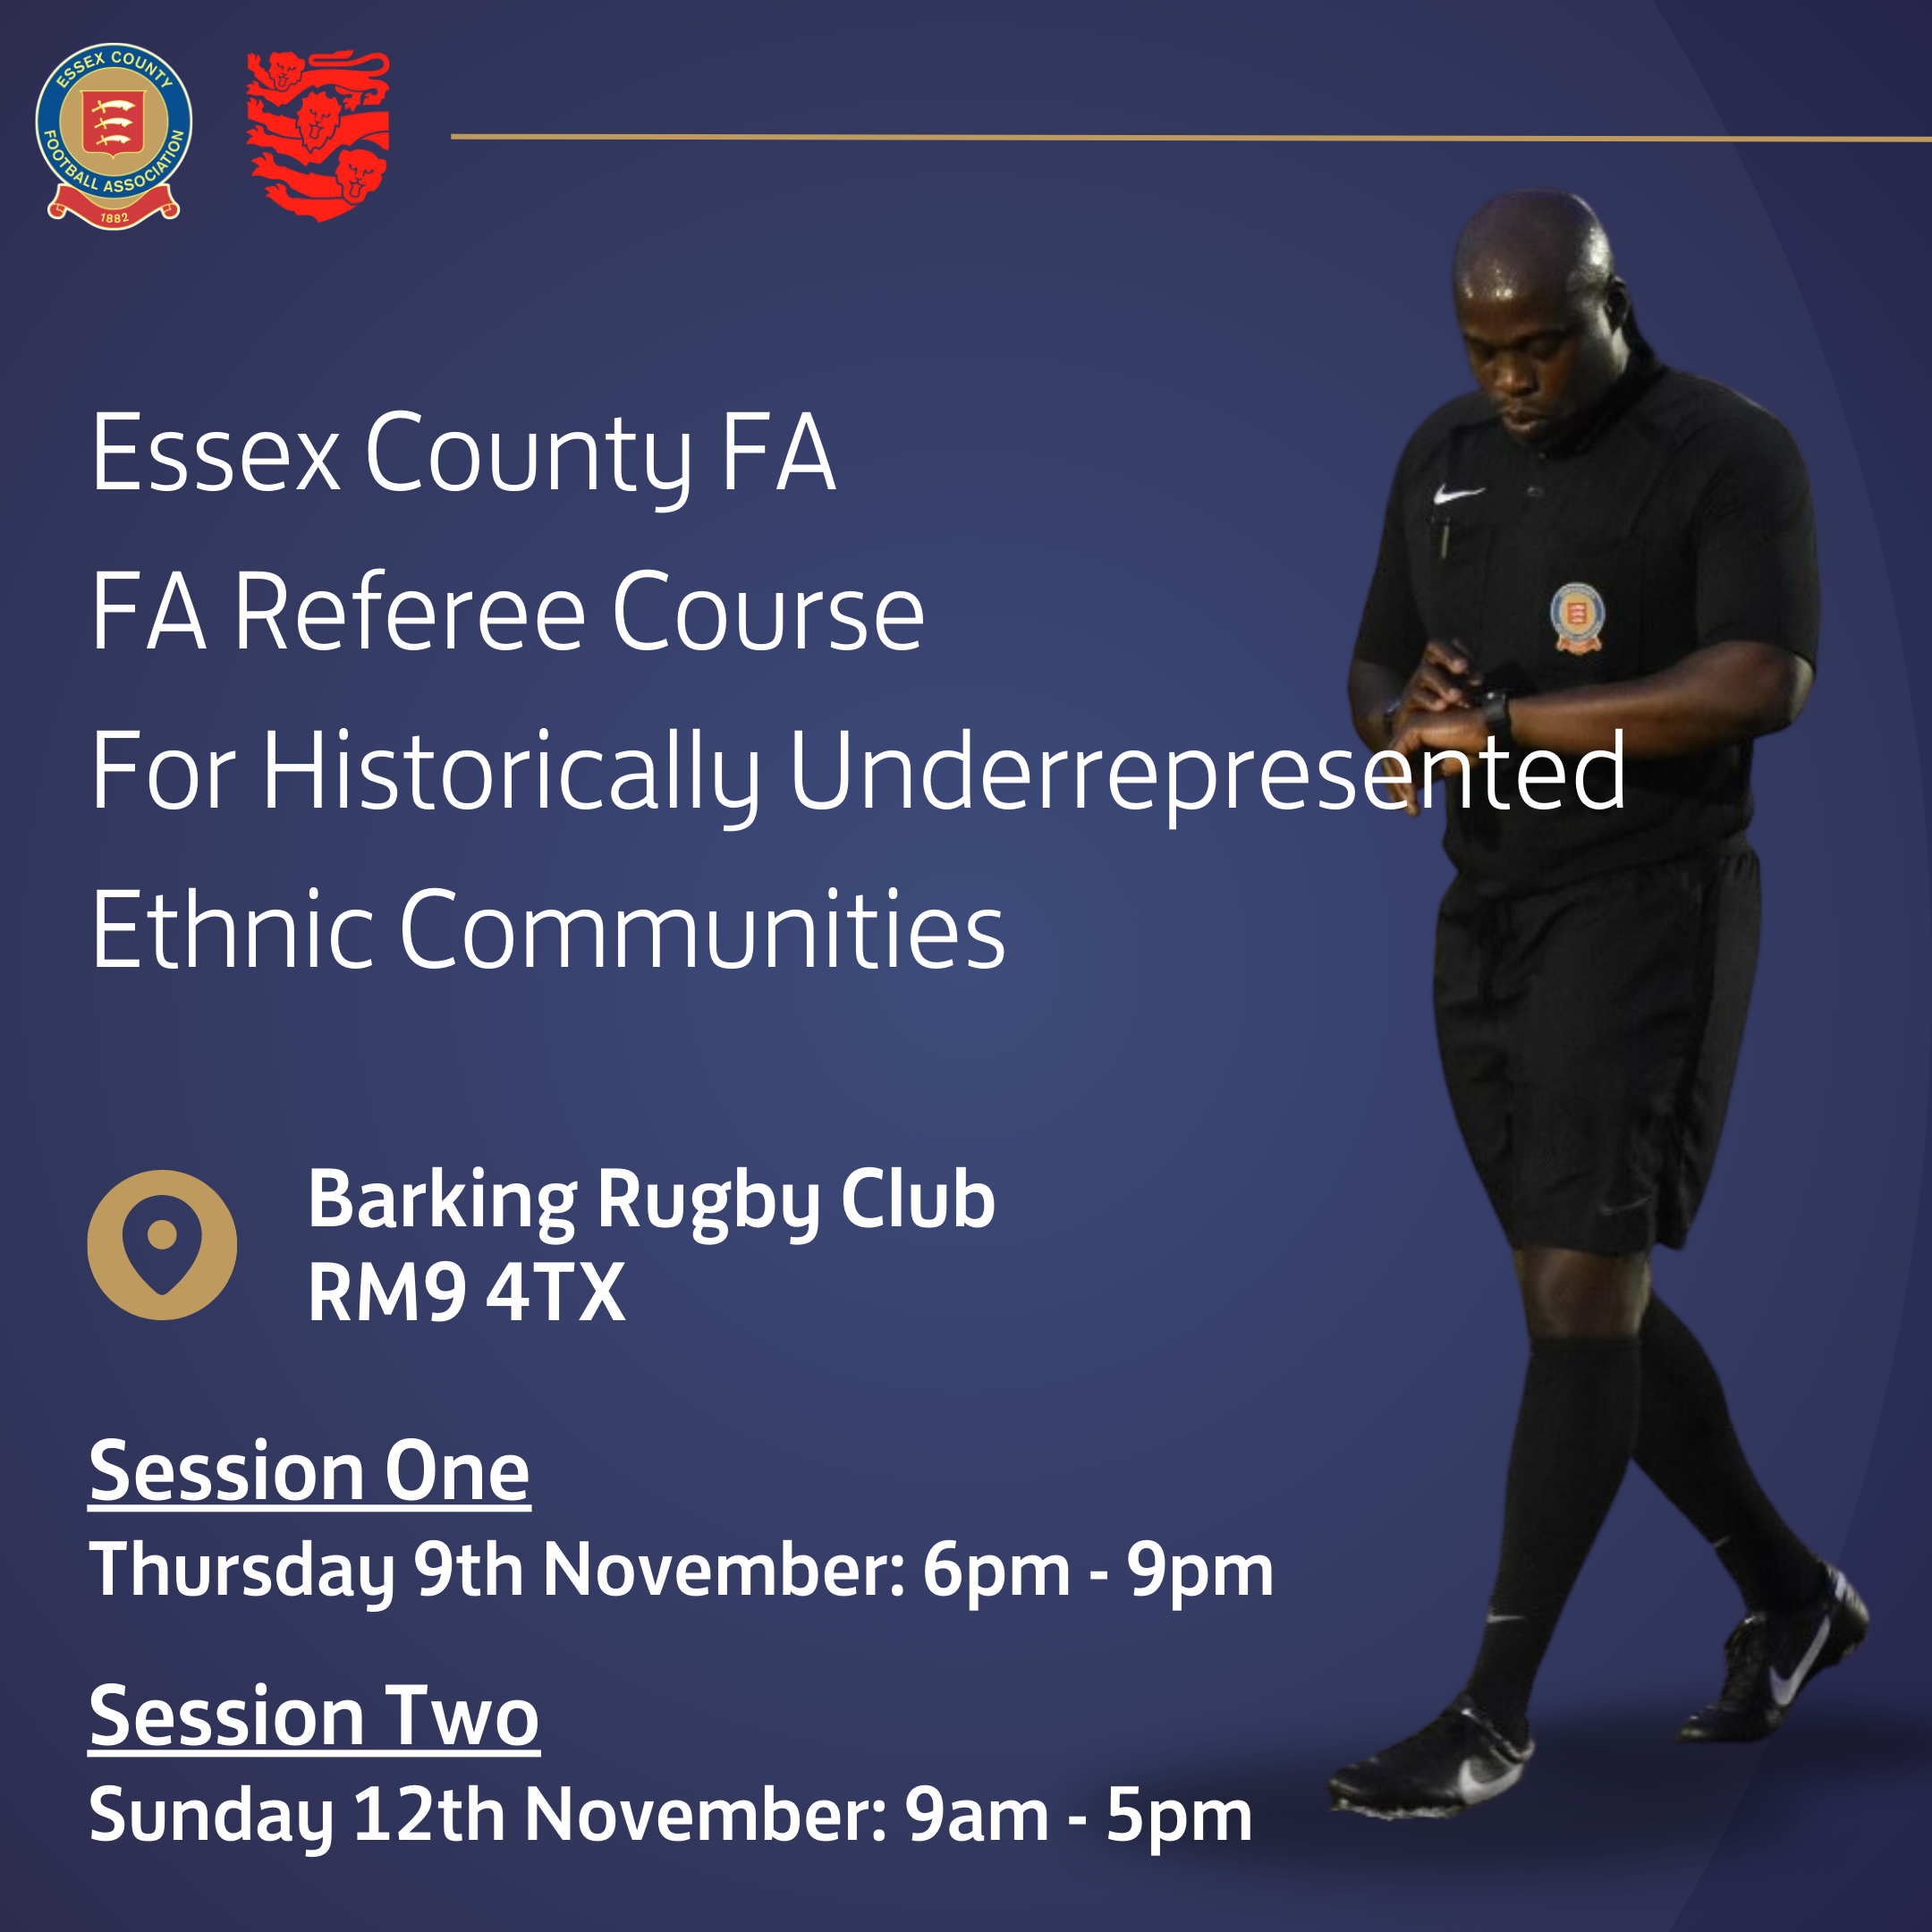 FA Referee Course for underrepresented ethnic communities 